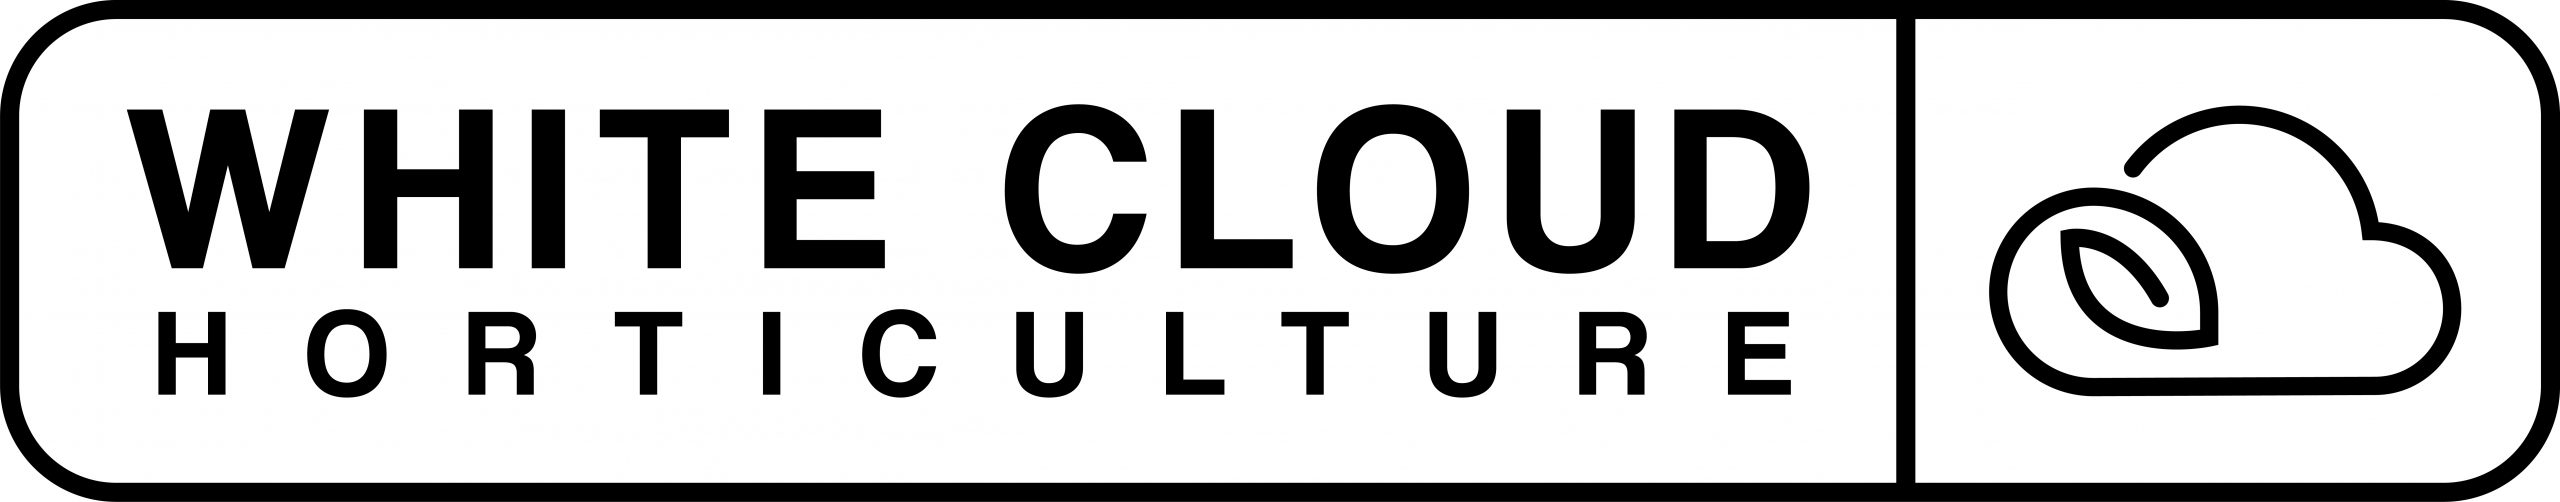 White Cloud Horticulture